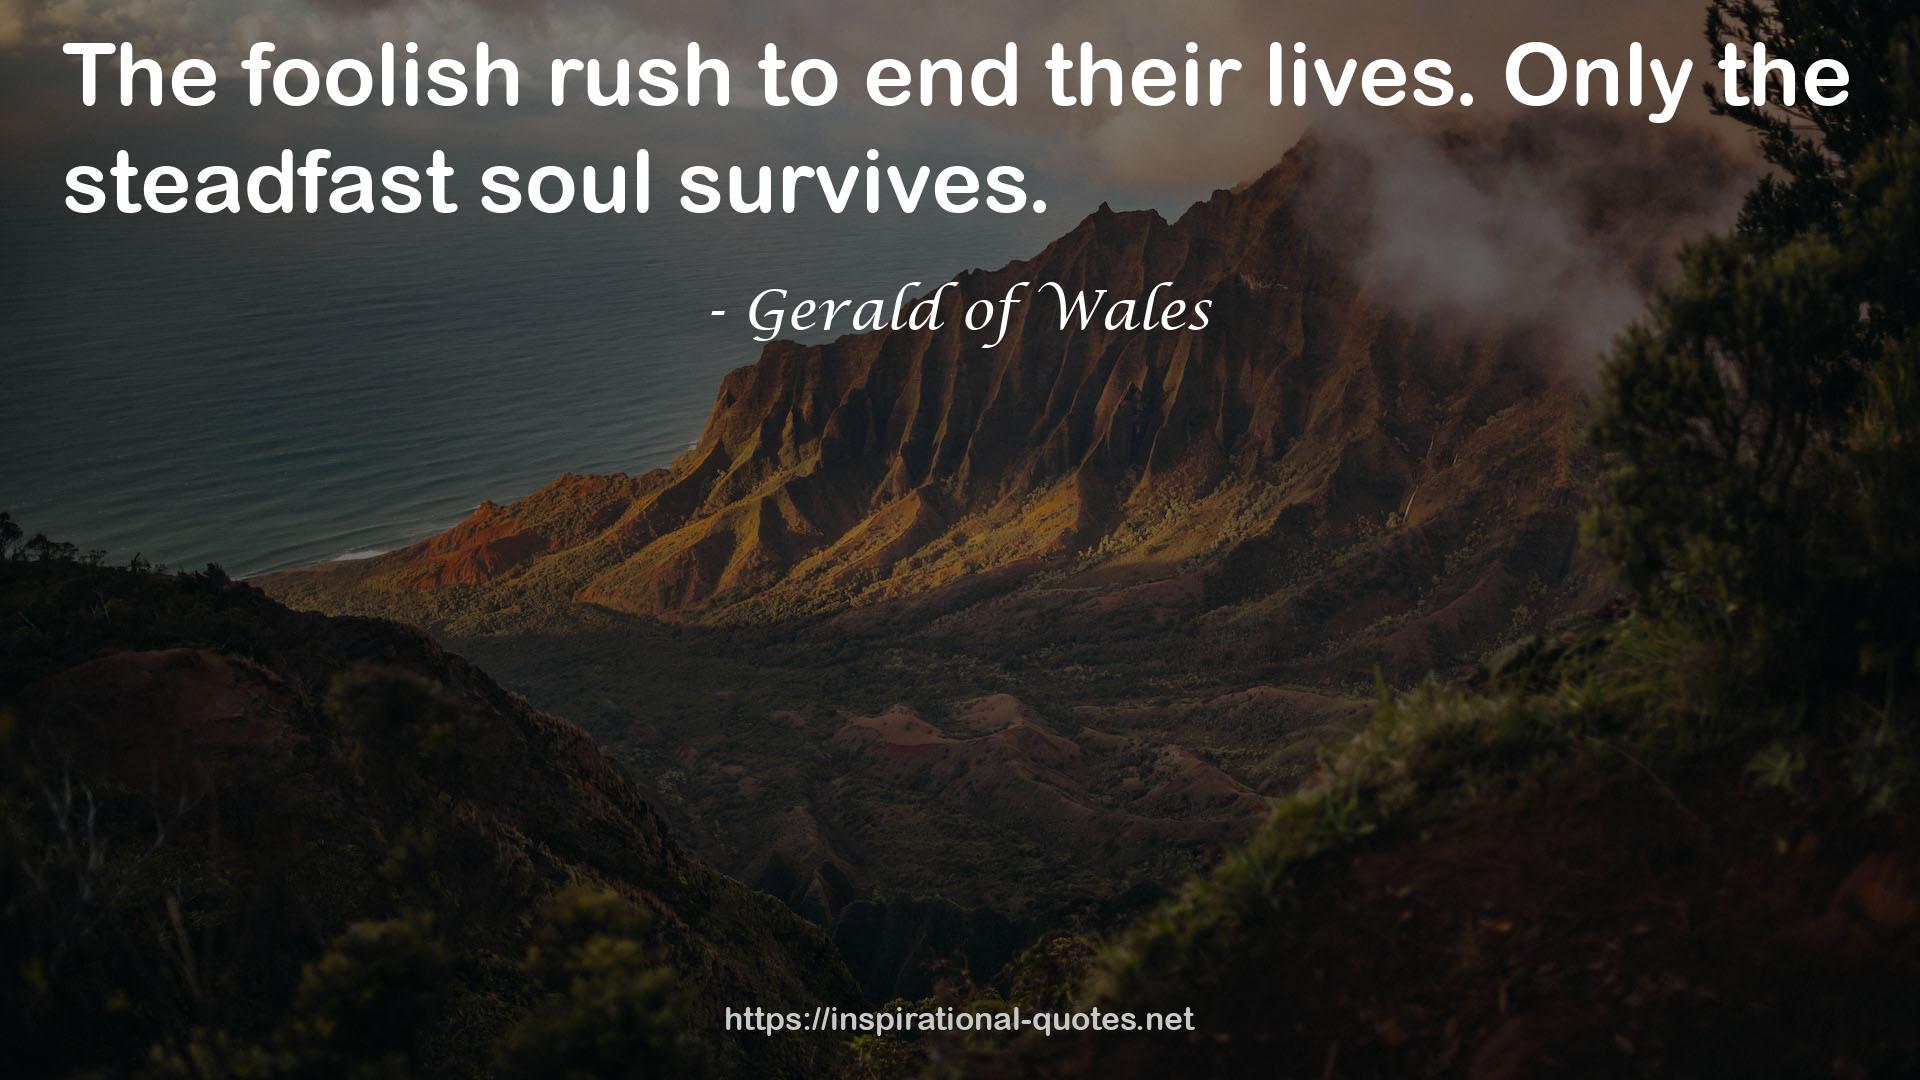 Gerald of Wales QUOTES